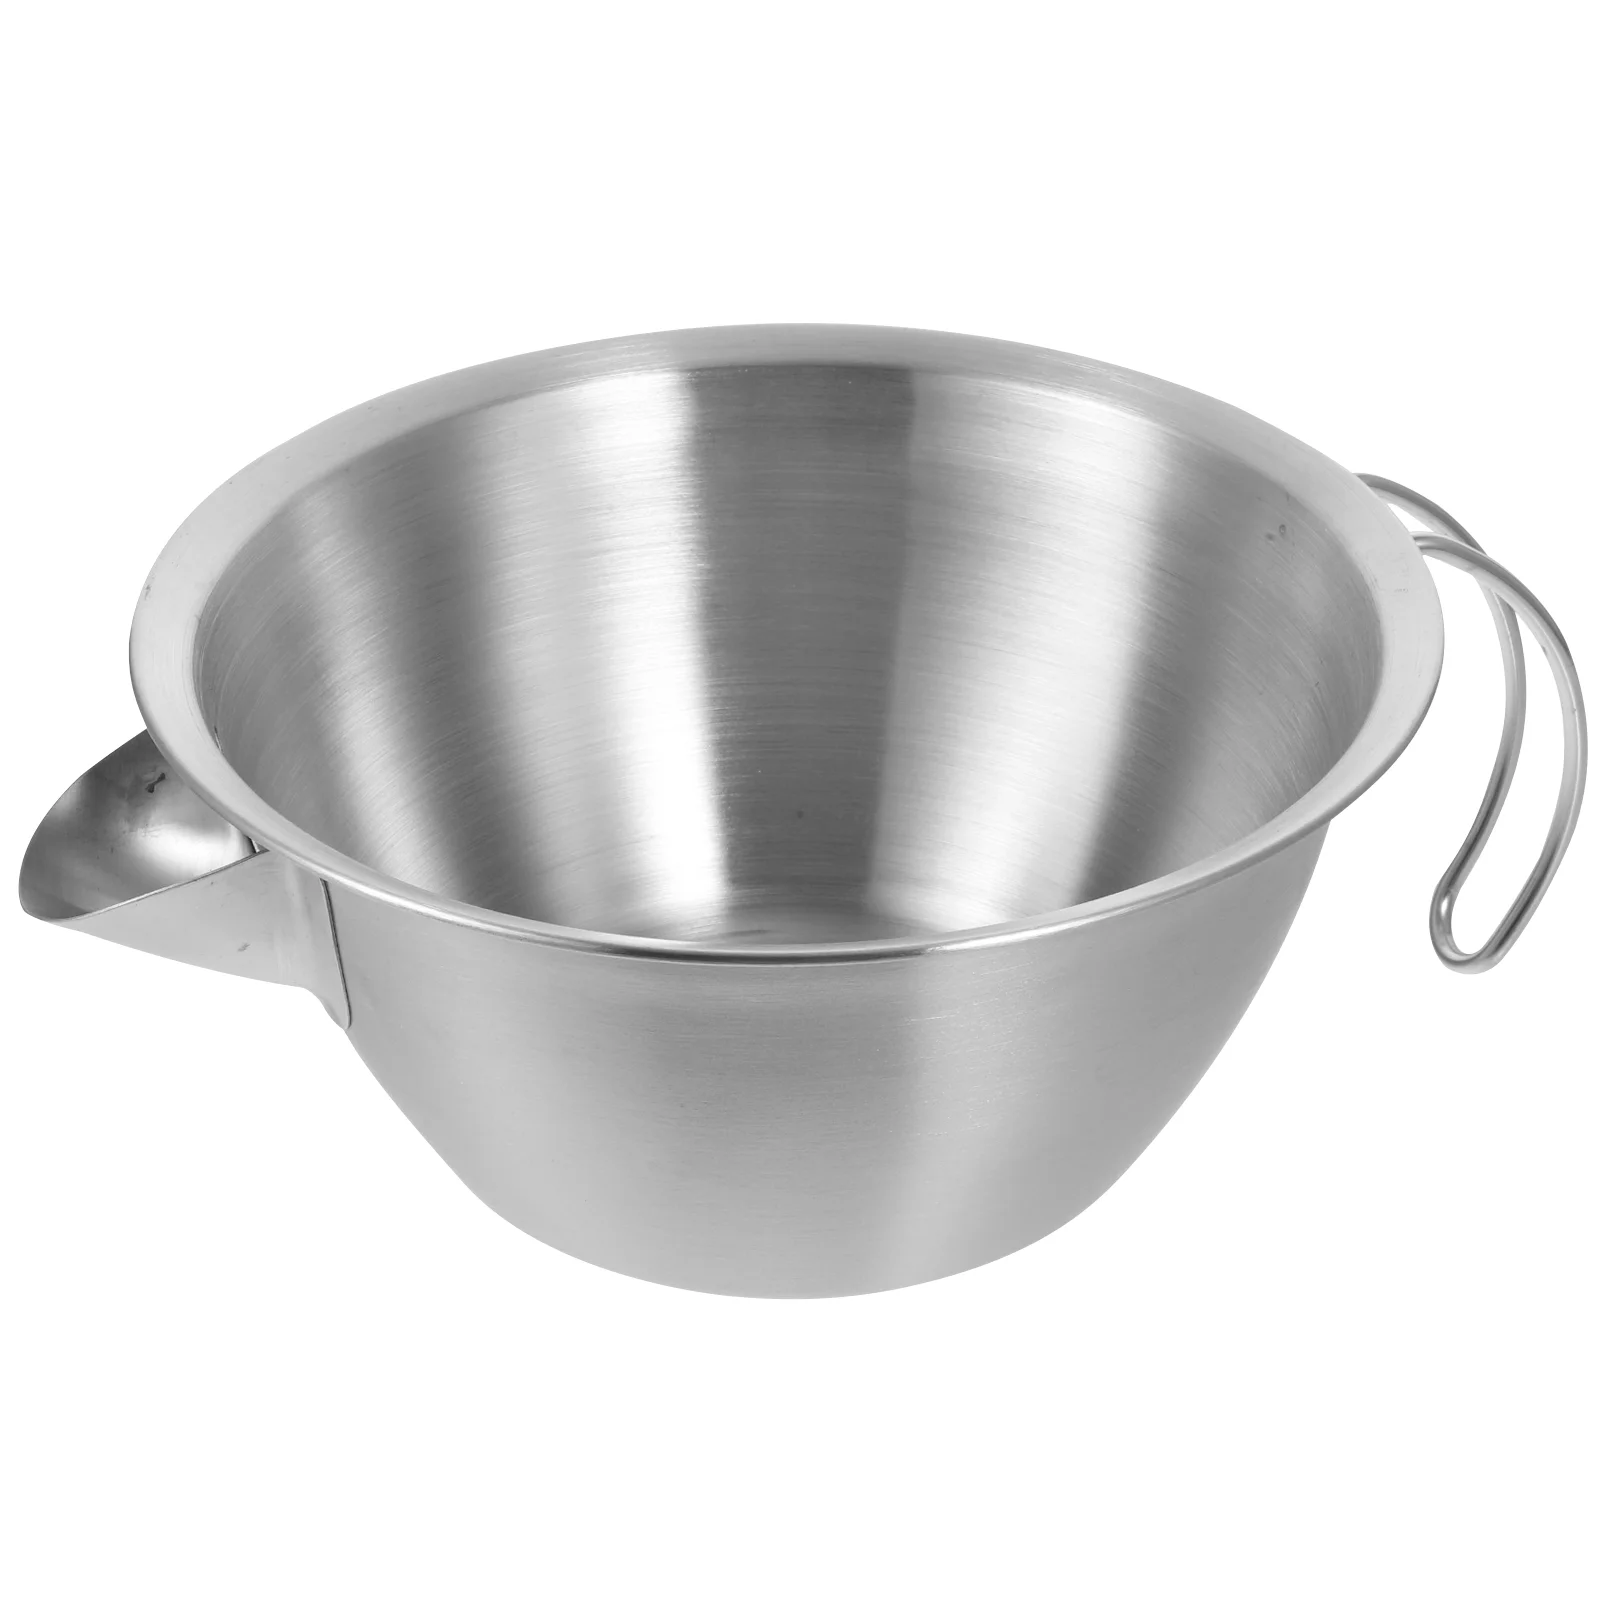 Large Stainless Steel Basin Vegetable Wash Extra Mixing Bowl Flat Bottom Home Bowls Kitchen Round Thick images - 6